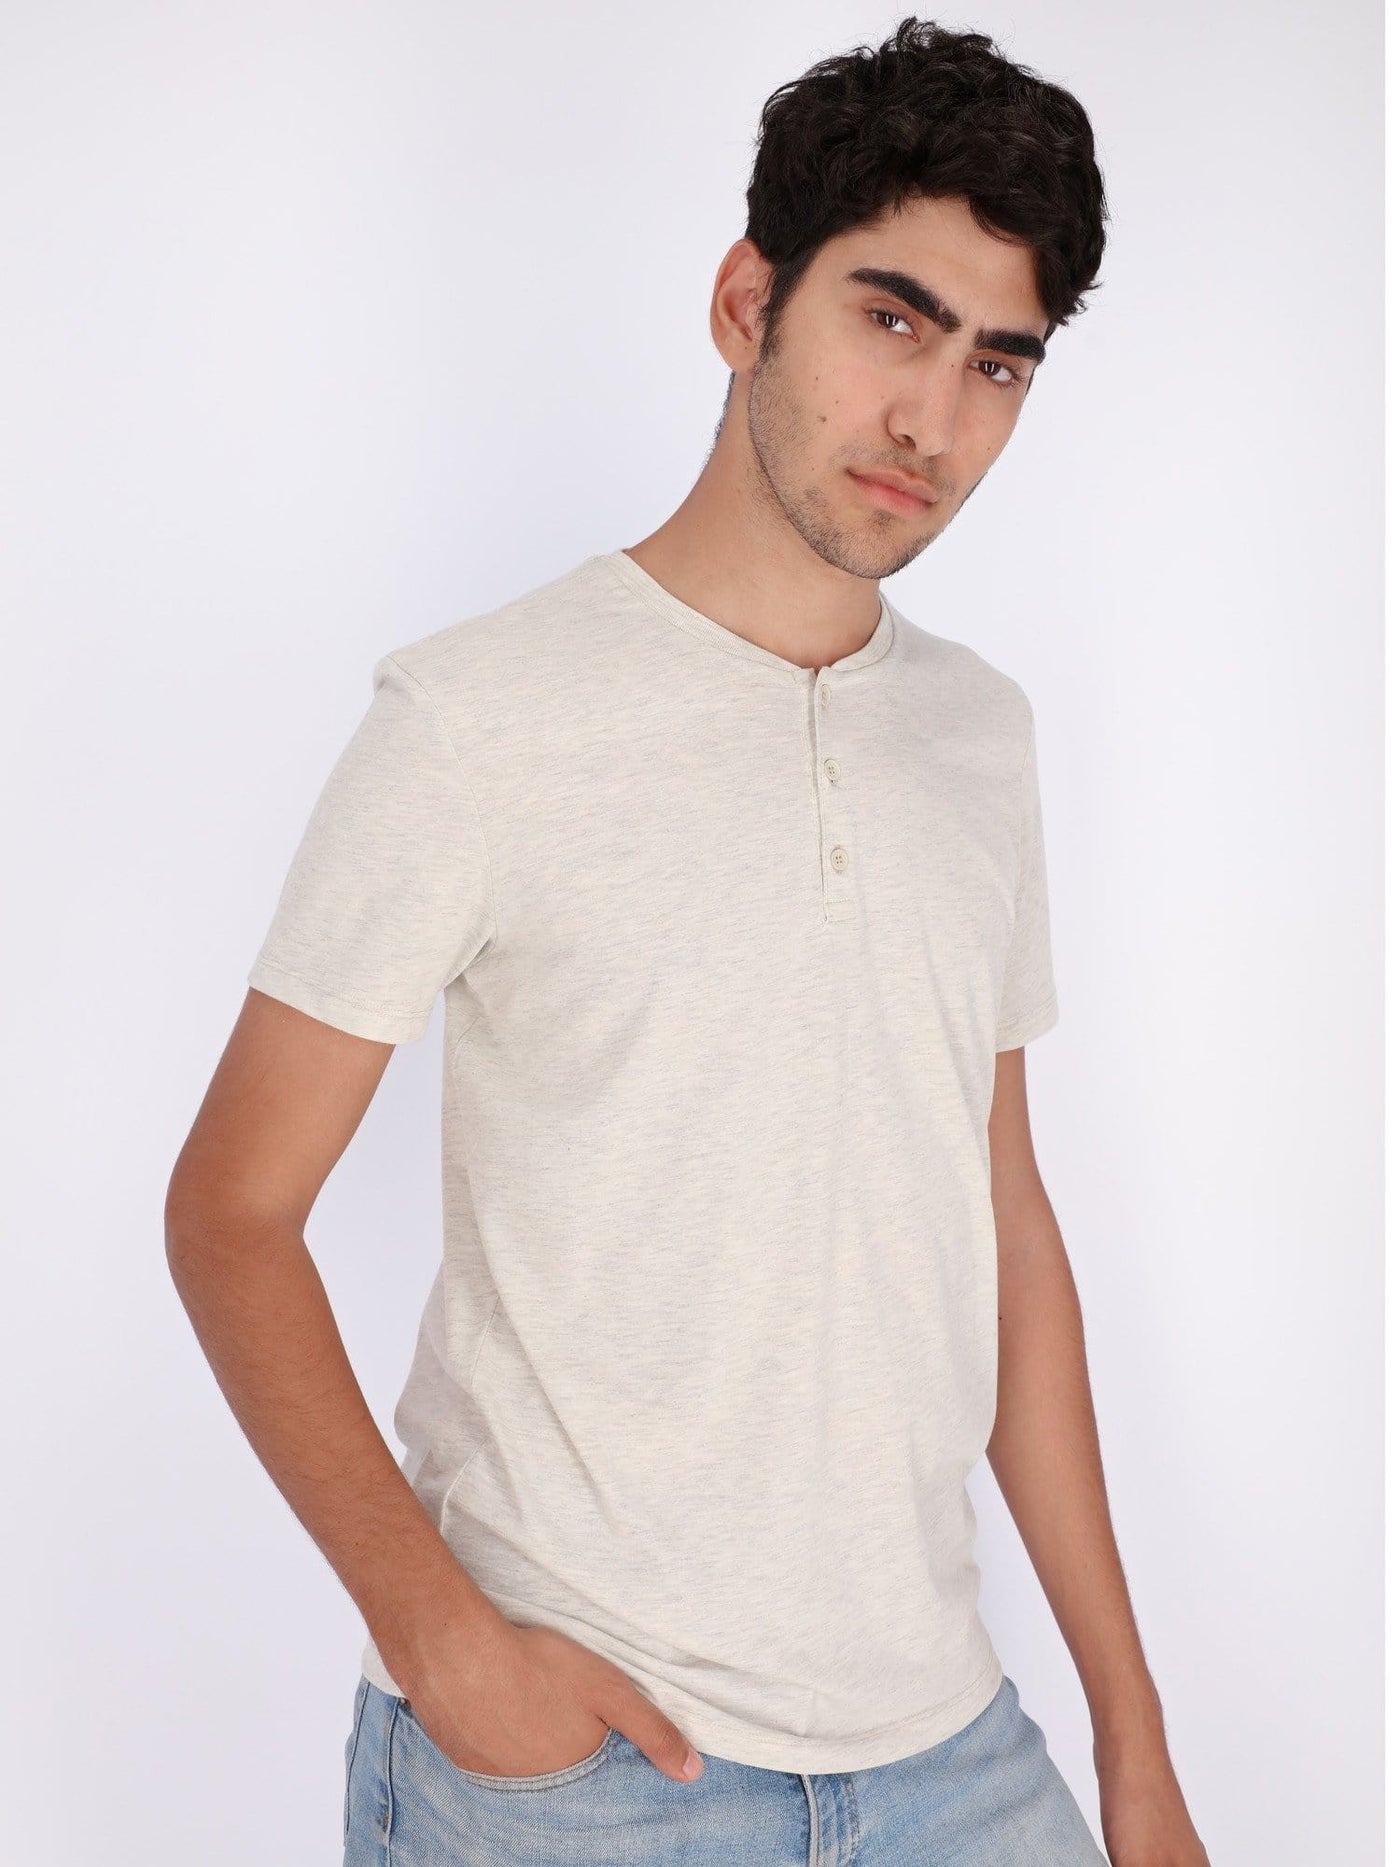 OR T-Shirts Short Sleeve Round Henley T-Shirt